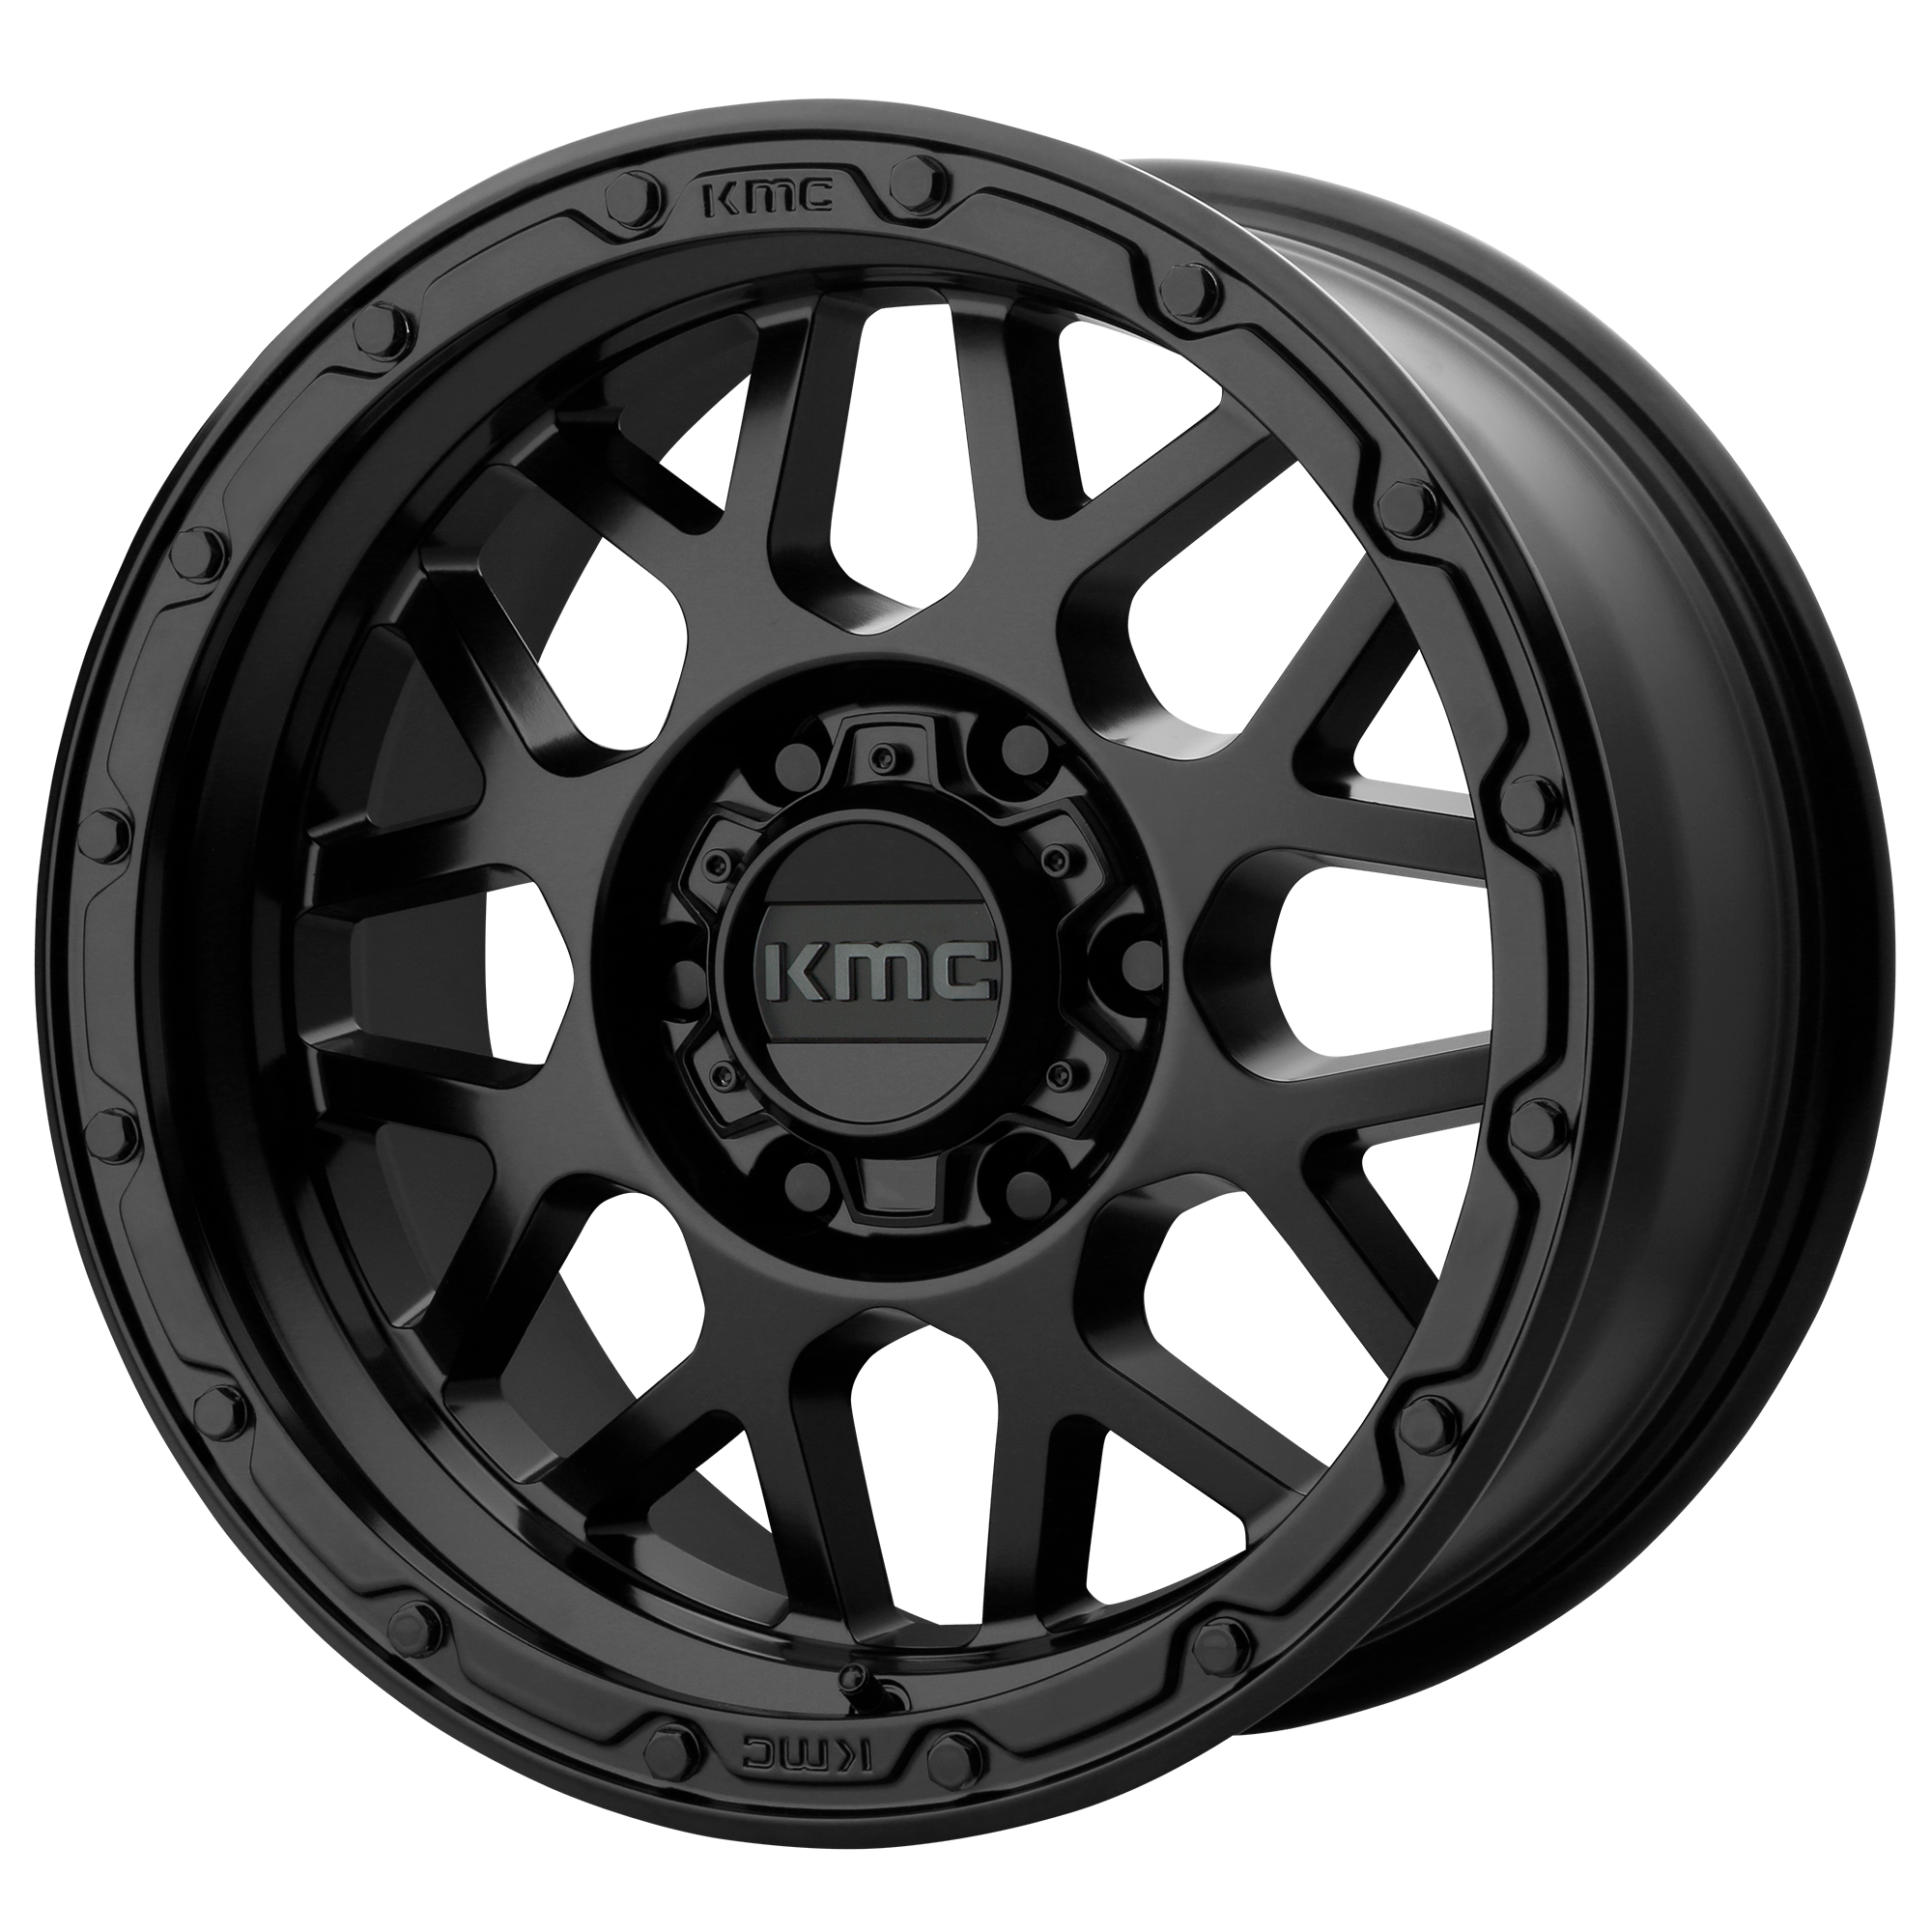 GRENADE OFF-ROAD 17x9 6x139.70 MATTE BLACK (18 mm) - Tires and Engine Performance